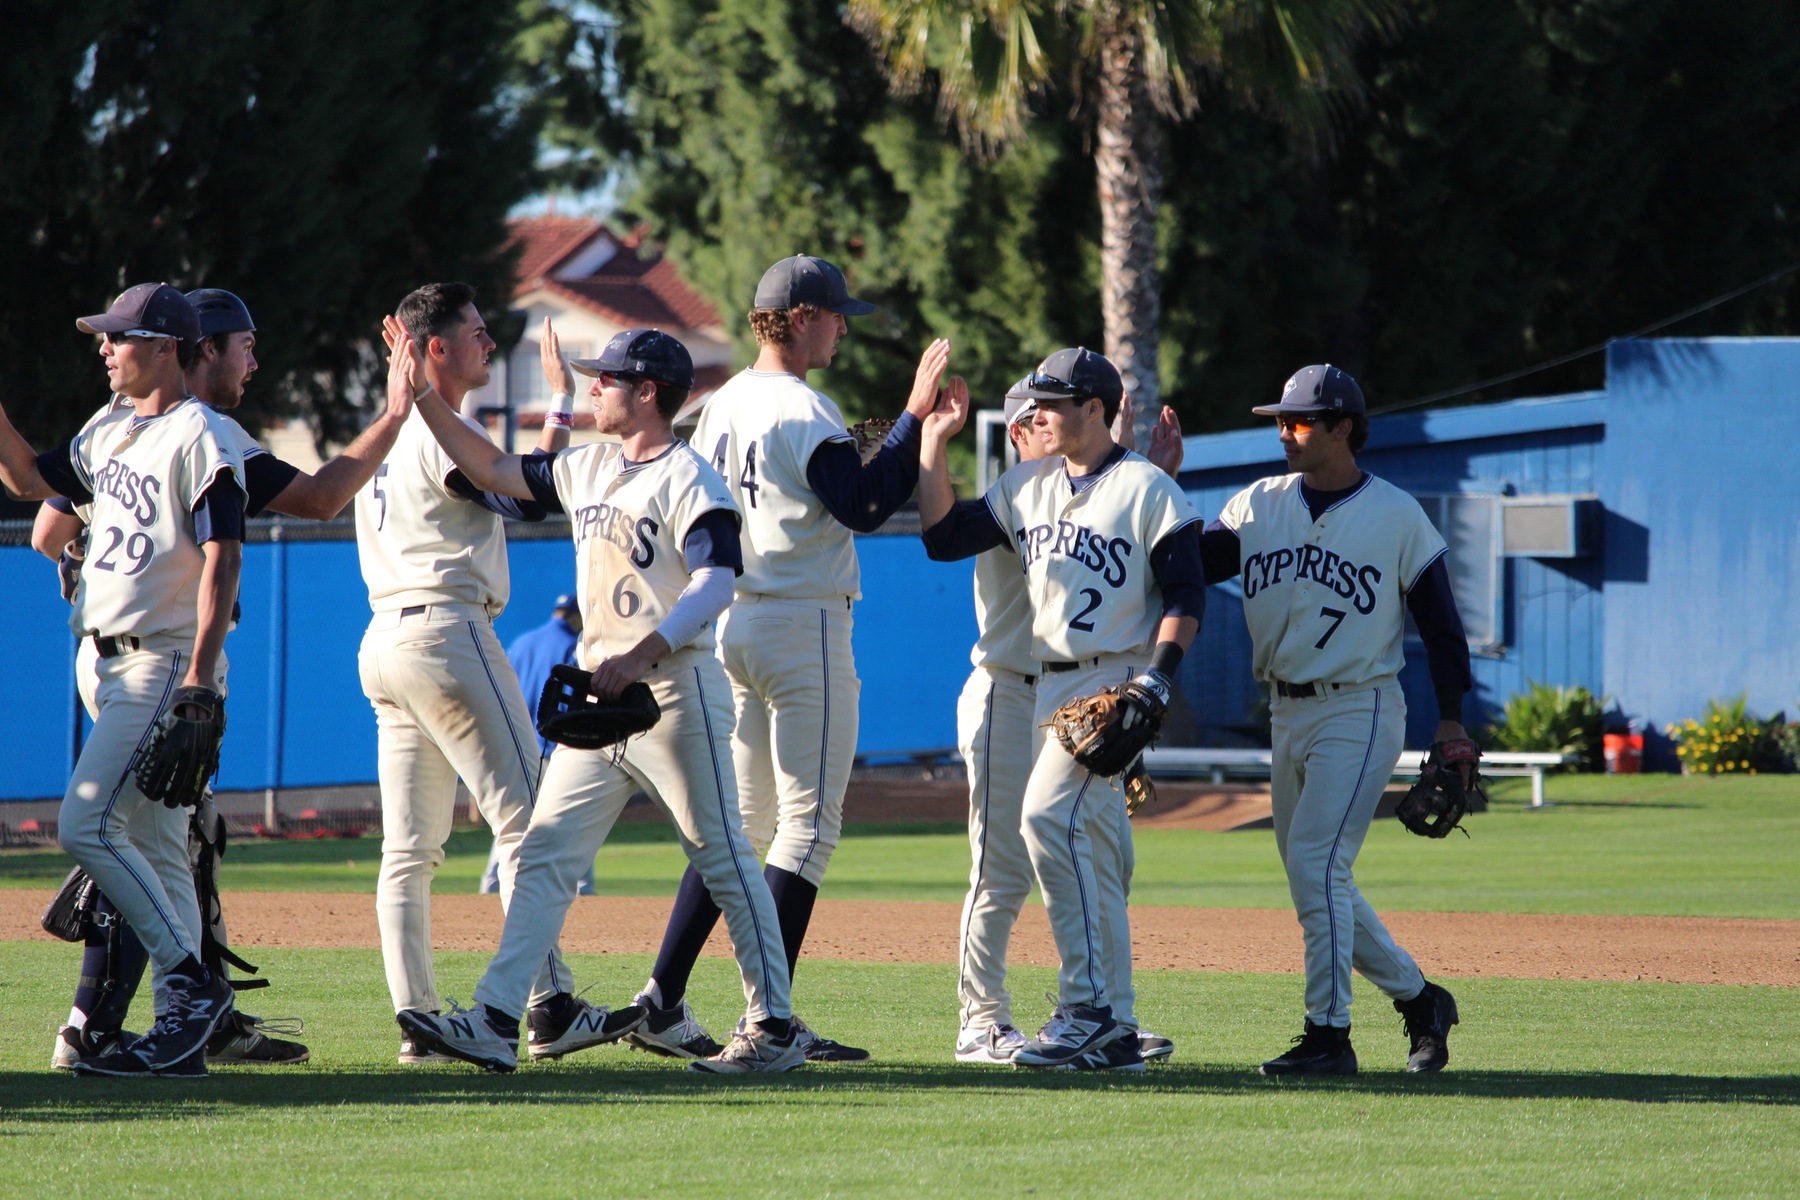 No. 4 Chargers Storm Back to Defeat No. 8 Tigers, 8-7